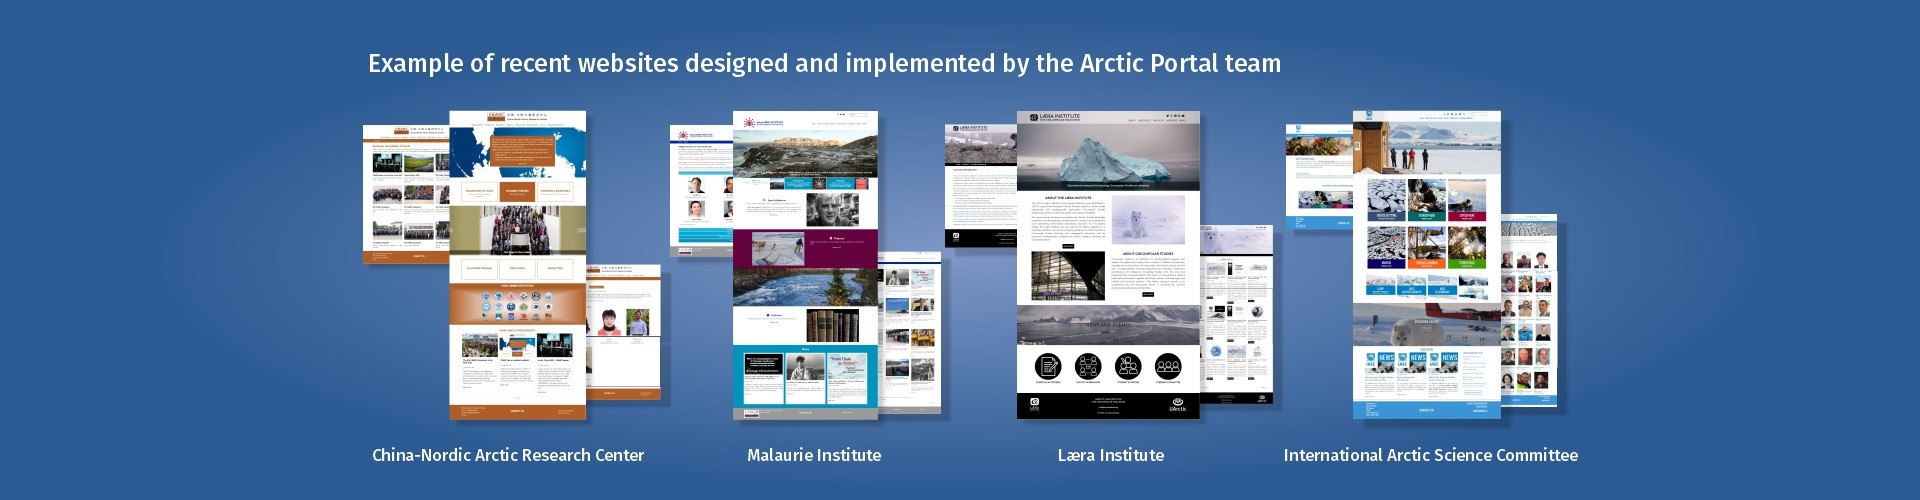 Example of designed & hosted websites by Arctic Portal